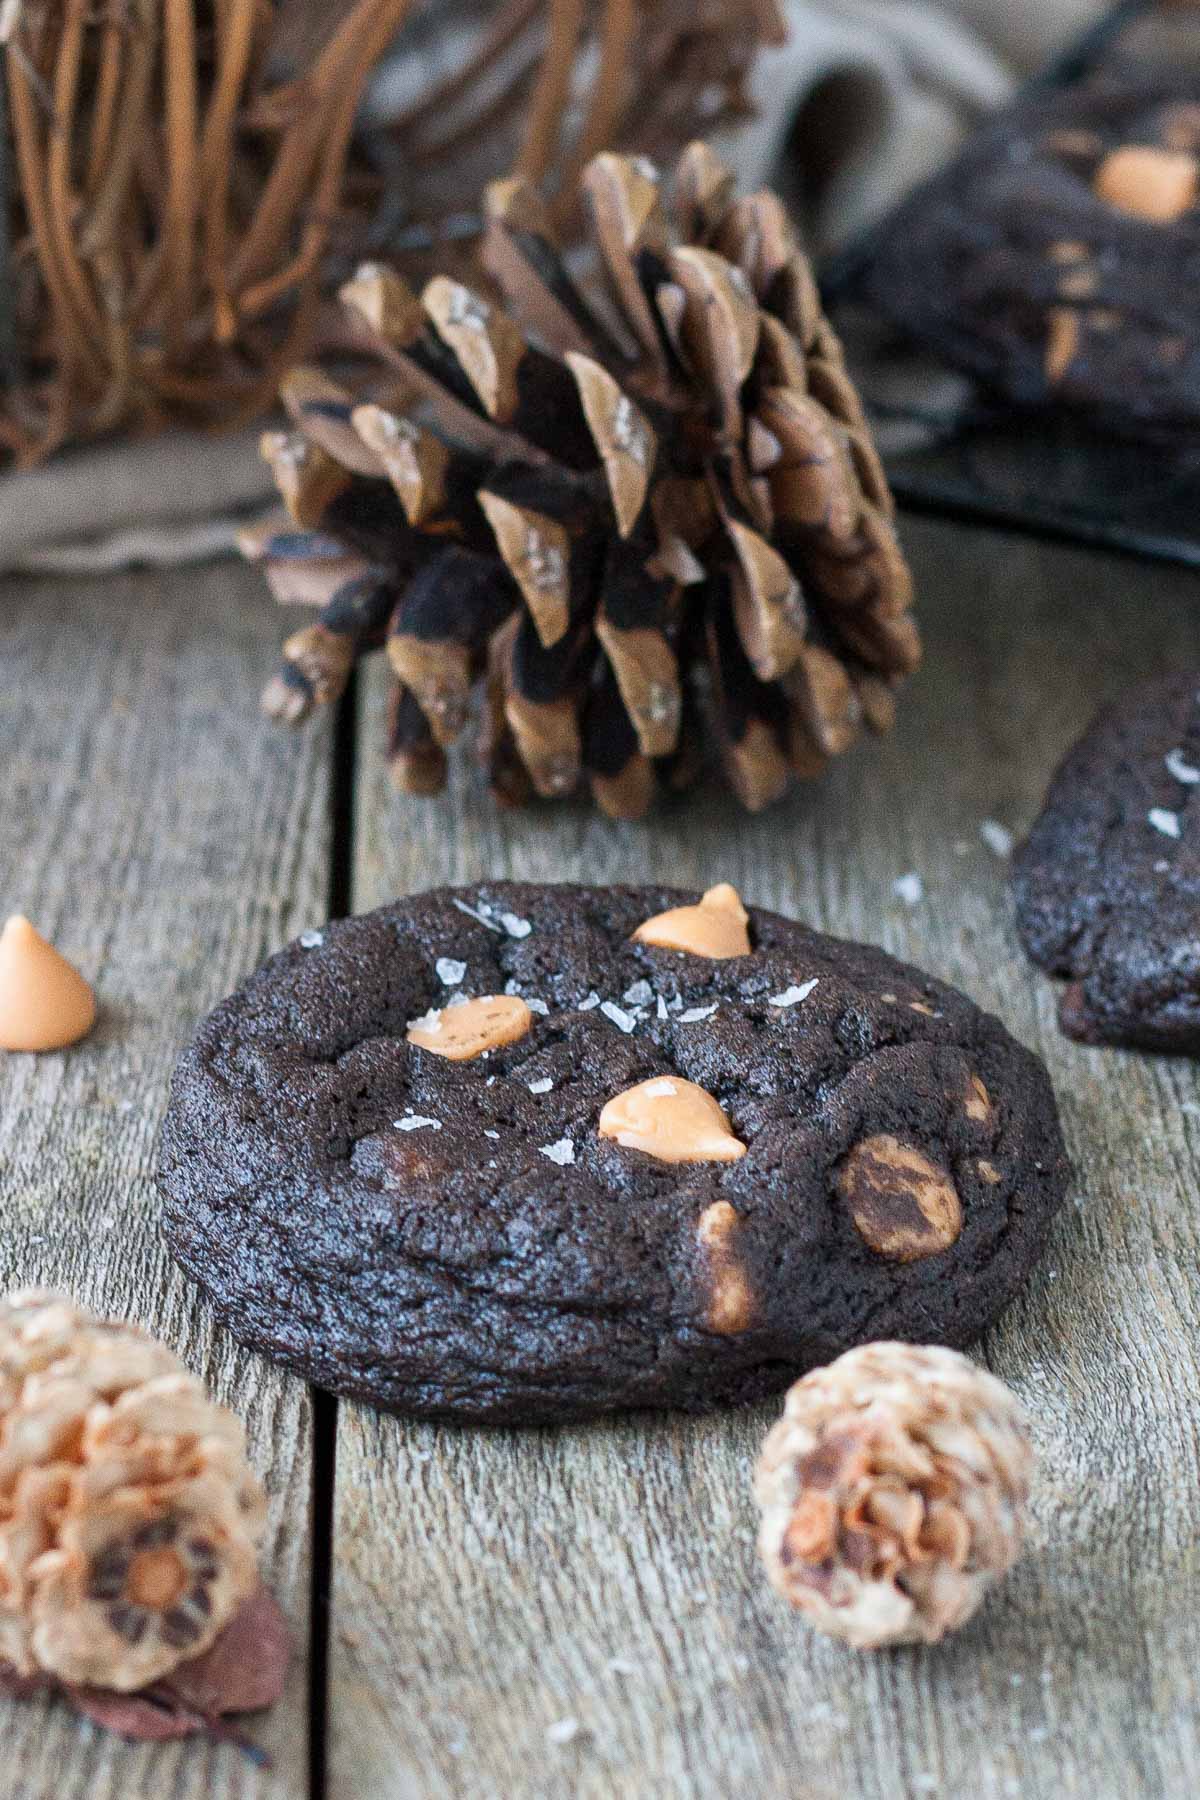 Cookie with salt sprinkled on it and a pine cone in the background.